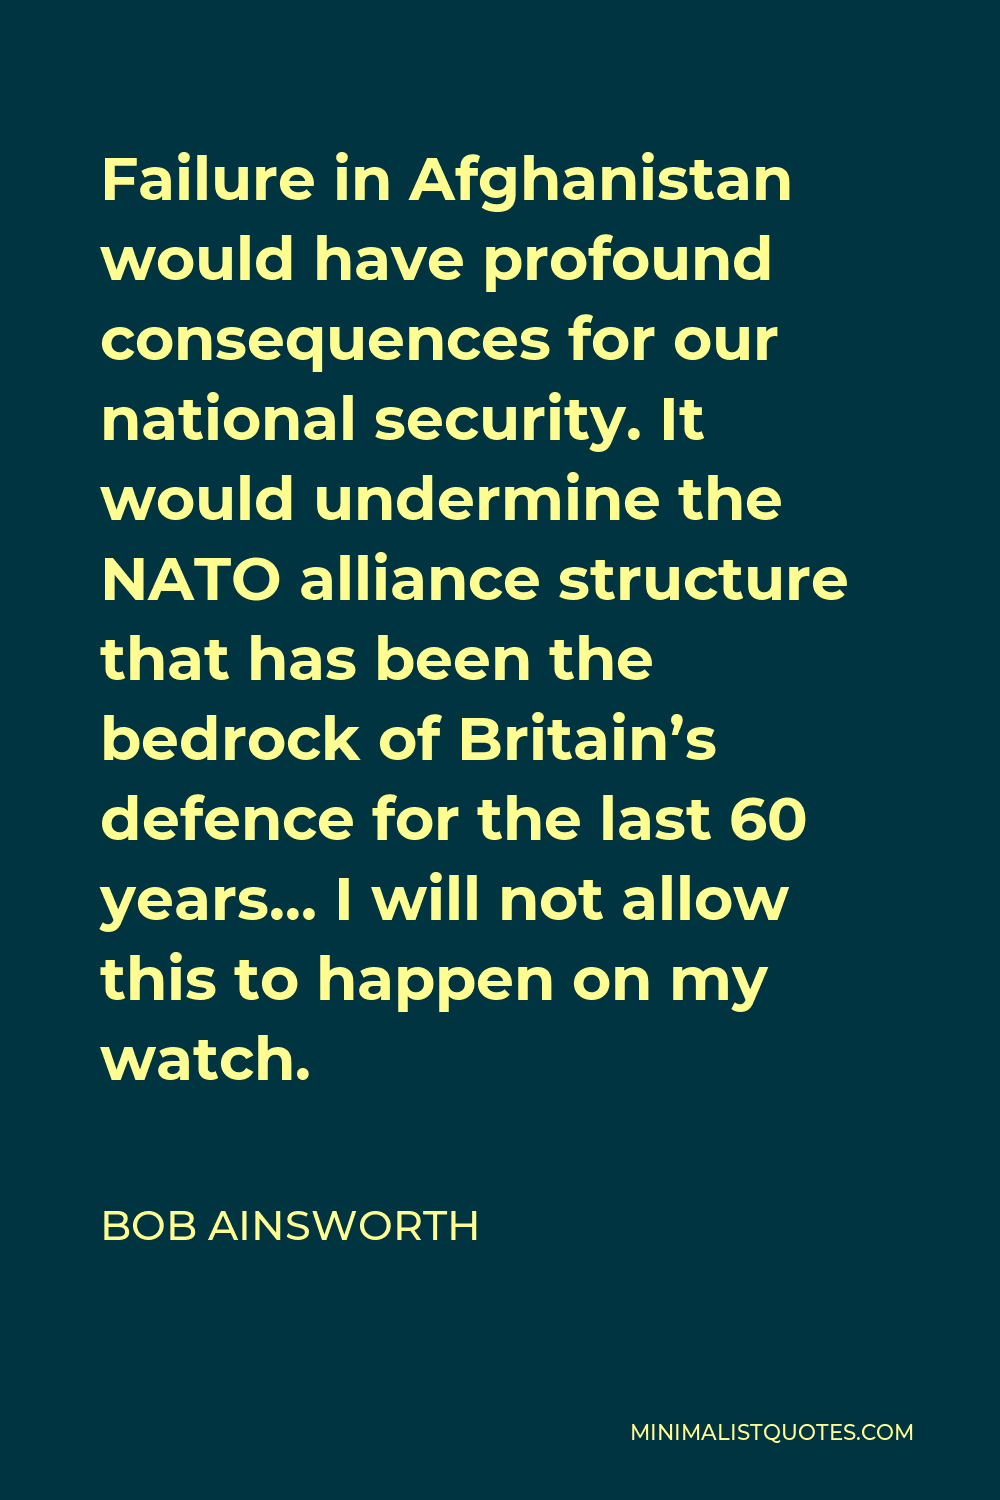 Bob Ainsworth Quote - Failure in Afghanistan would have profound consequences for our national security. It would undermine the NATO alliance structure that has been the bedrock of Britain’s defence for the last 60 years… I will not allow this to happen on my watch.